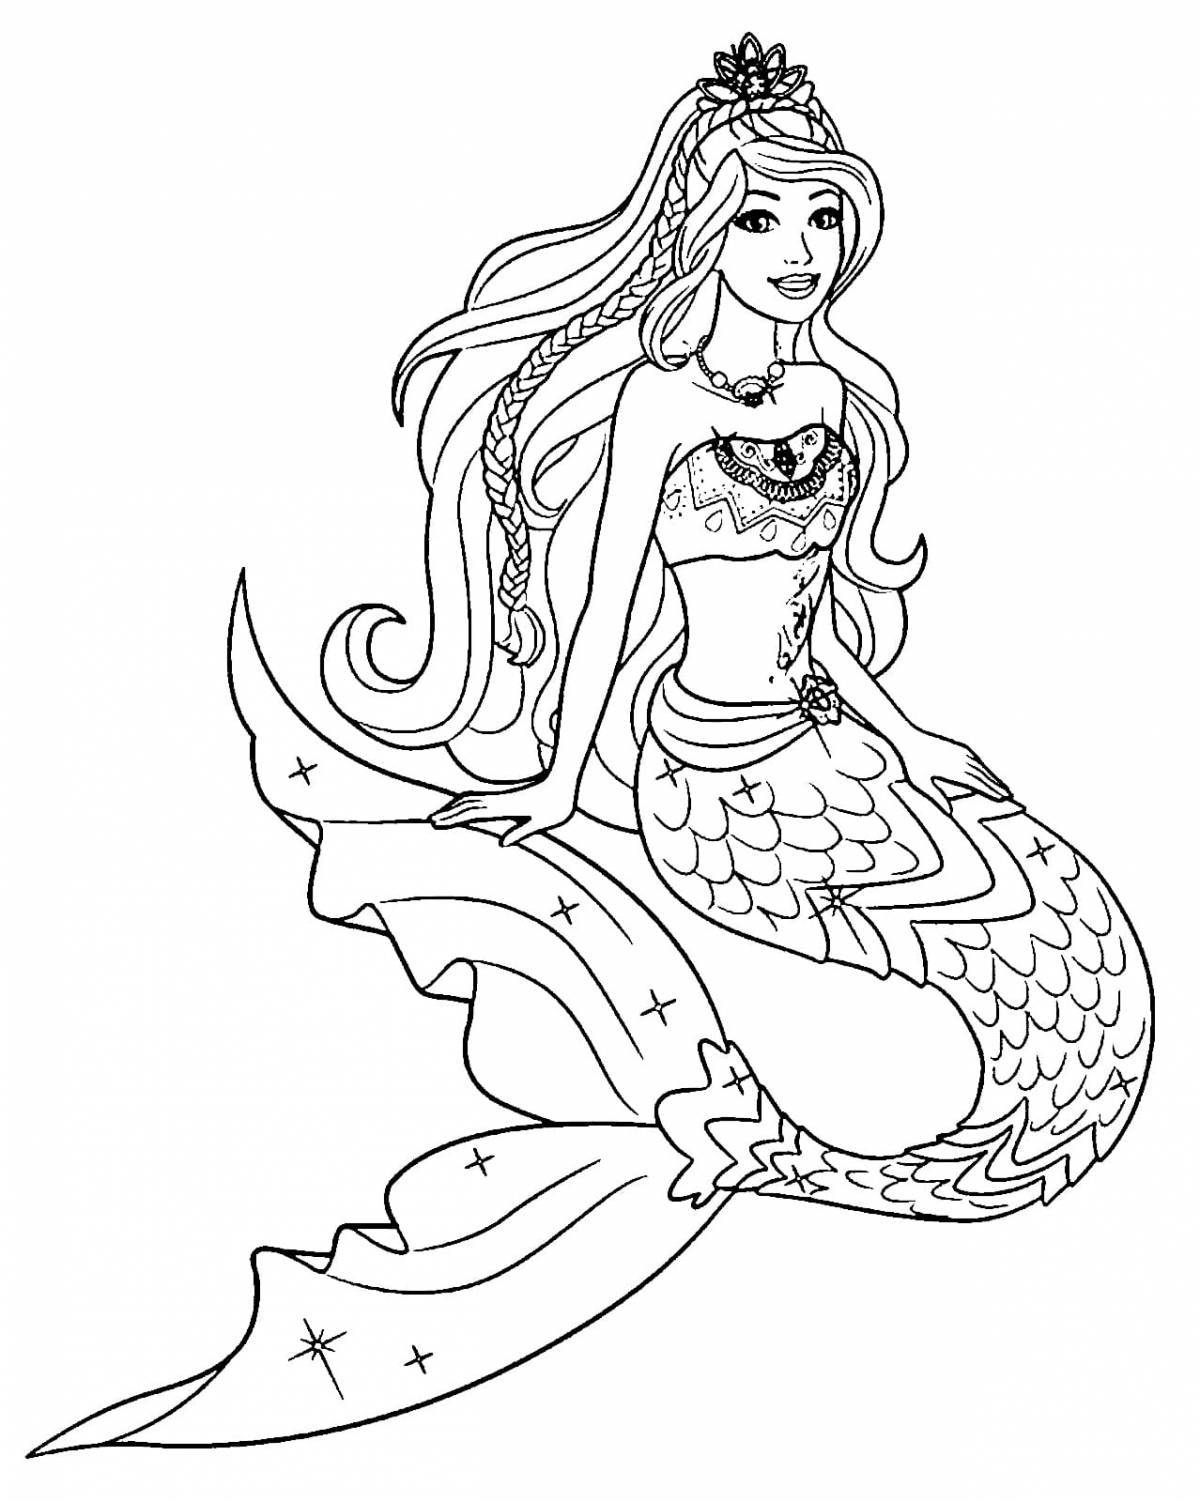 Amazing mermaid coloring book for girls